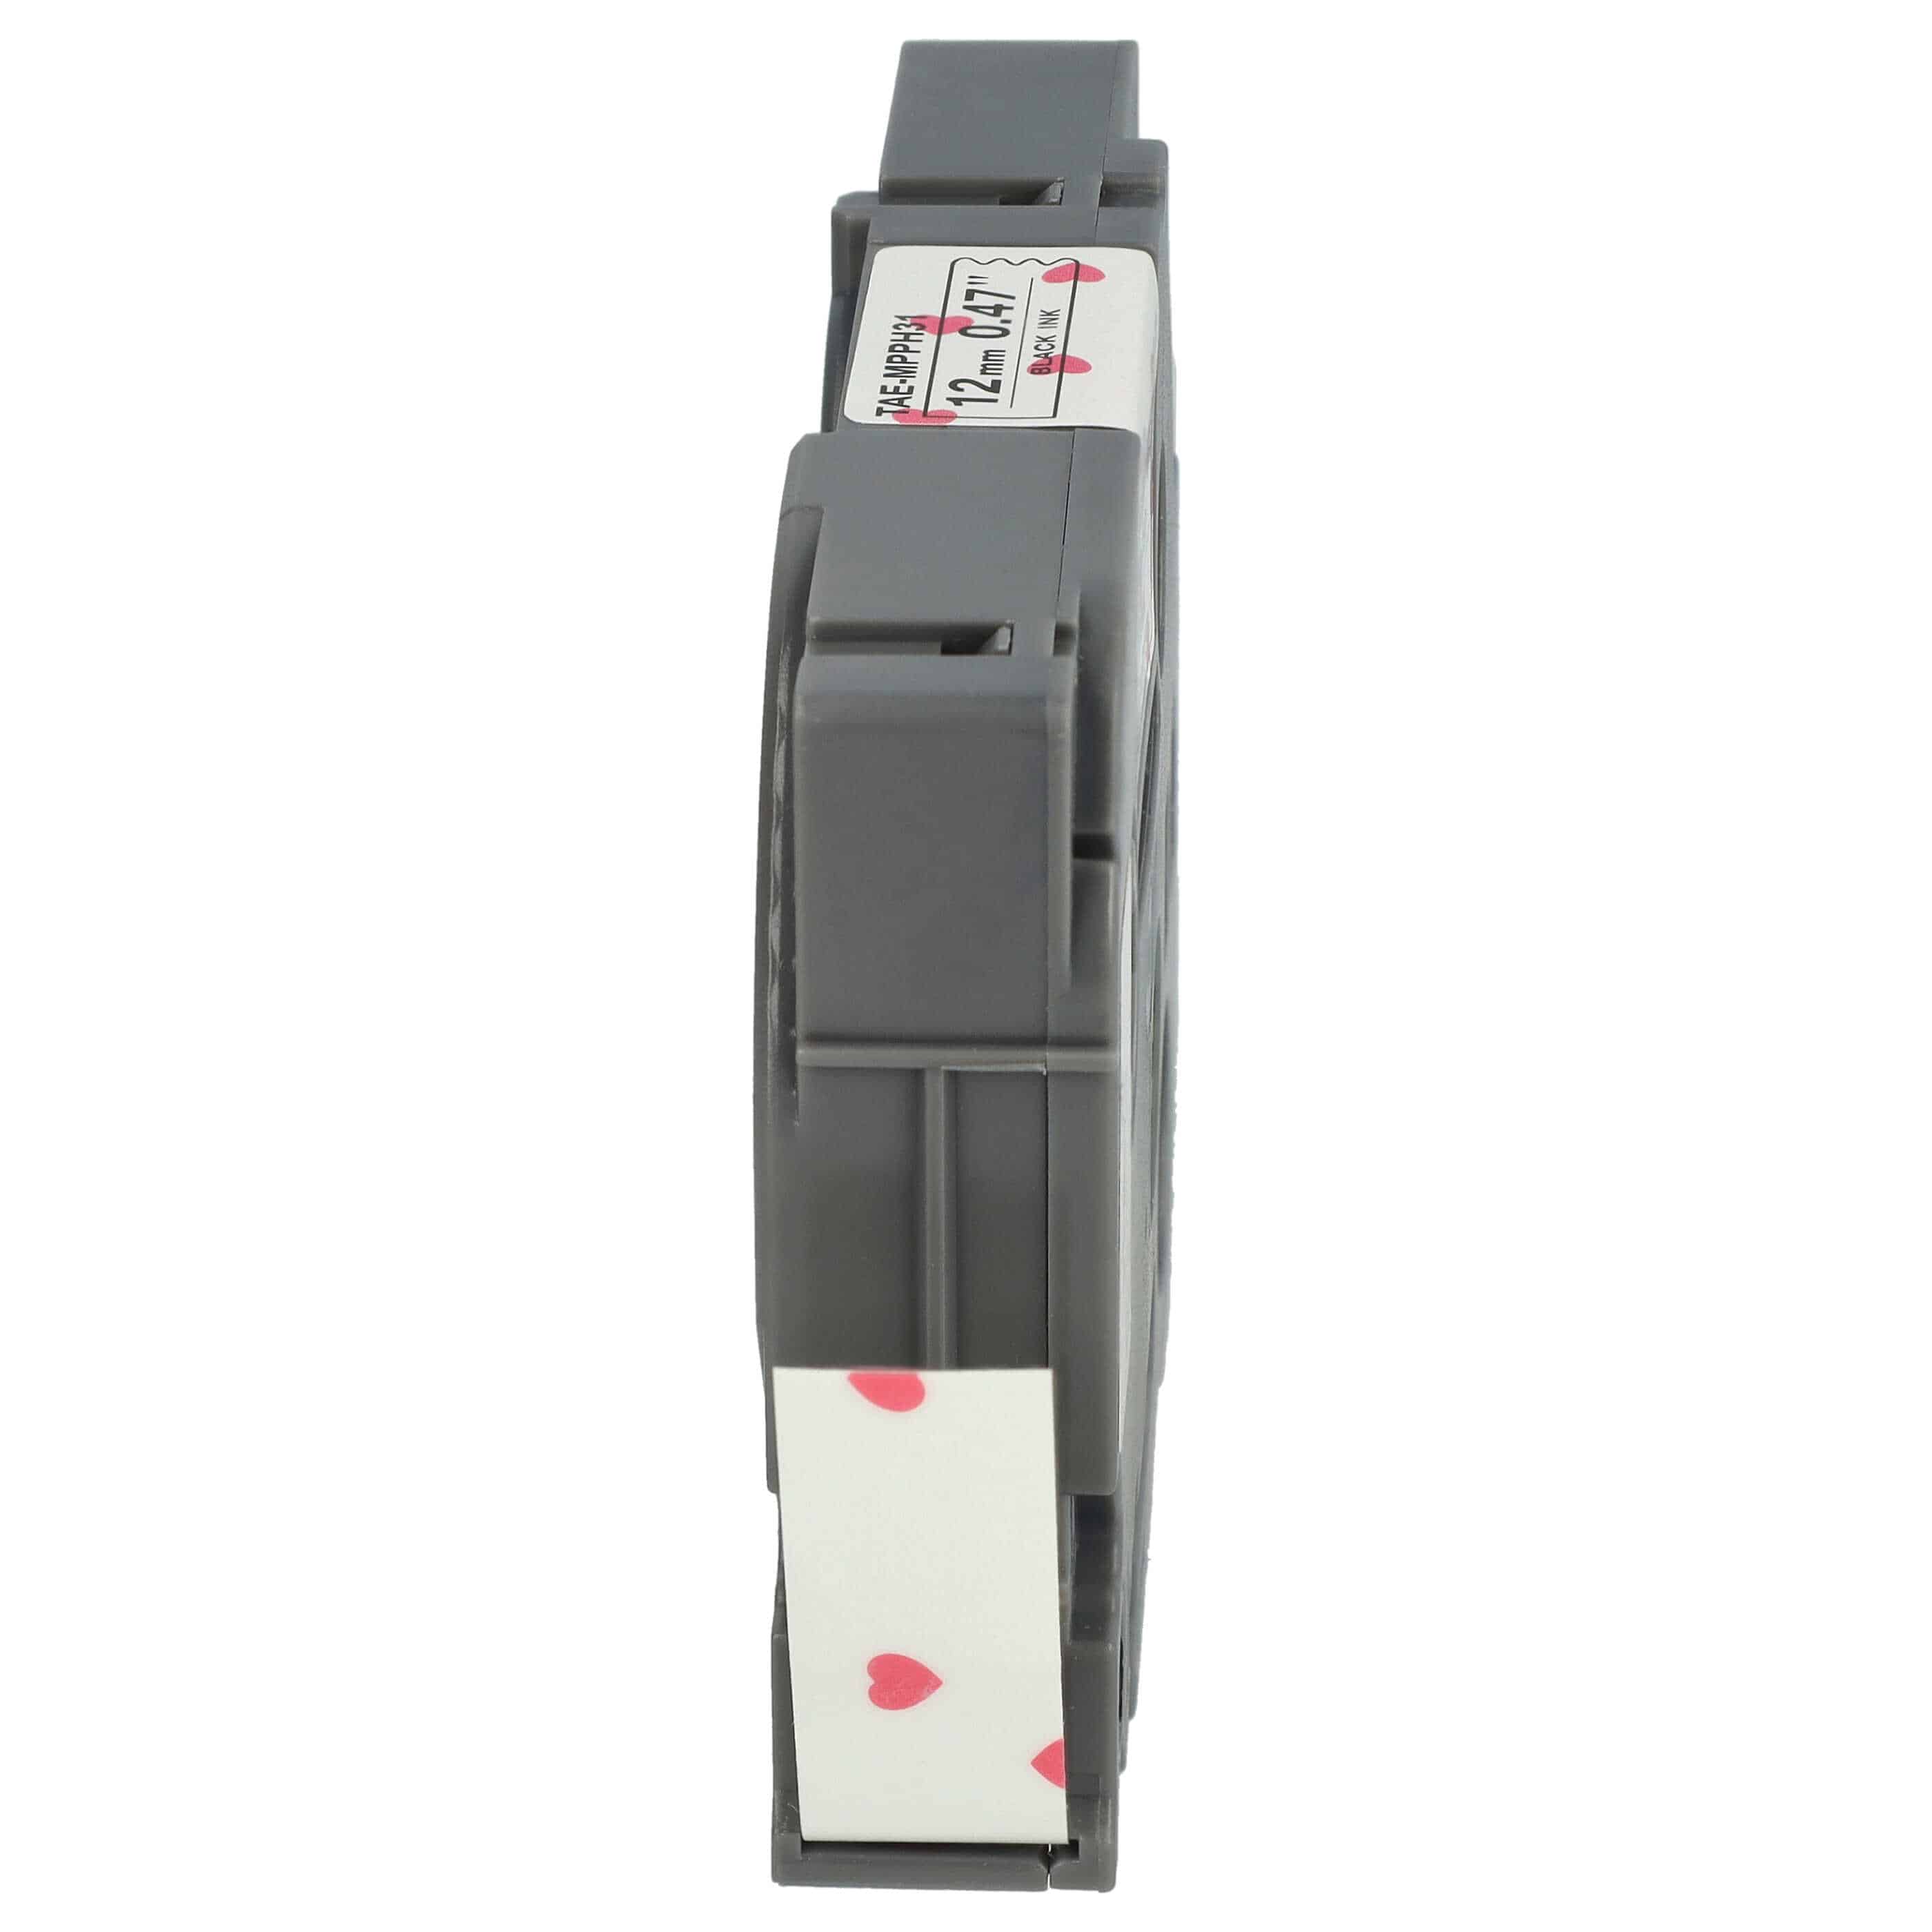 Label Tape as Replacement for Brother TZe-MPPH31 - 12 mm Black to White with pink hearts